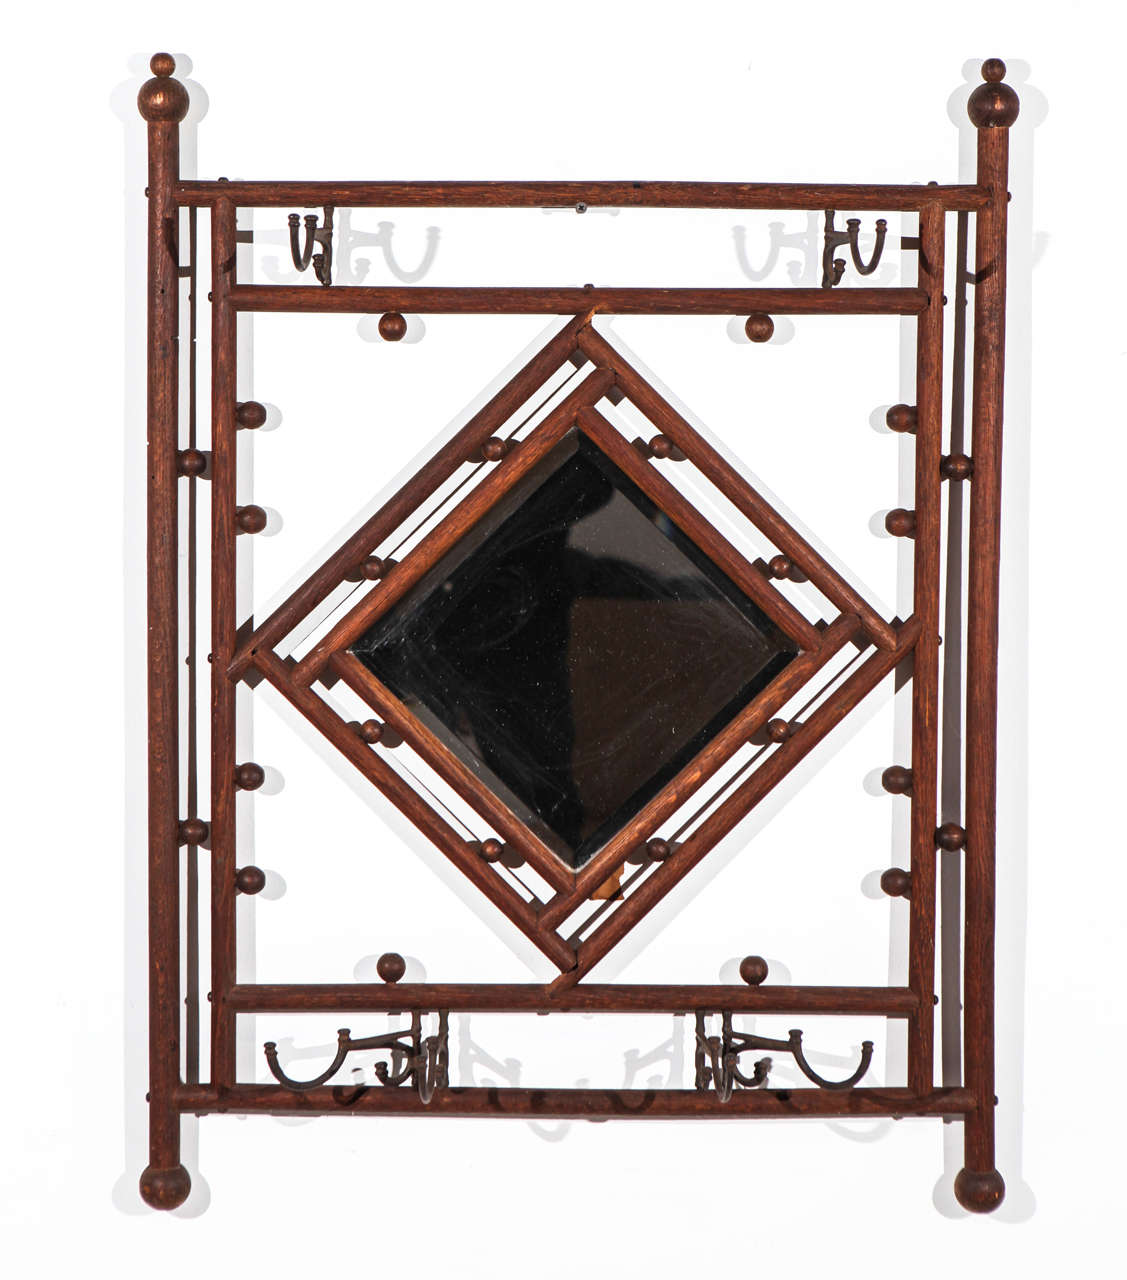 Rustic farm style wall rack with center square / diamond mirror.